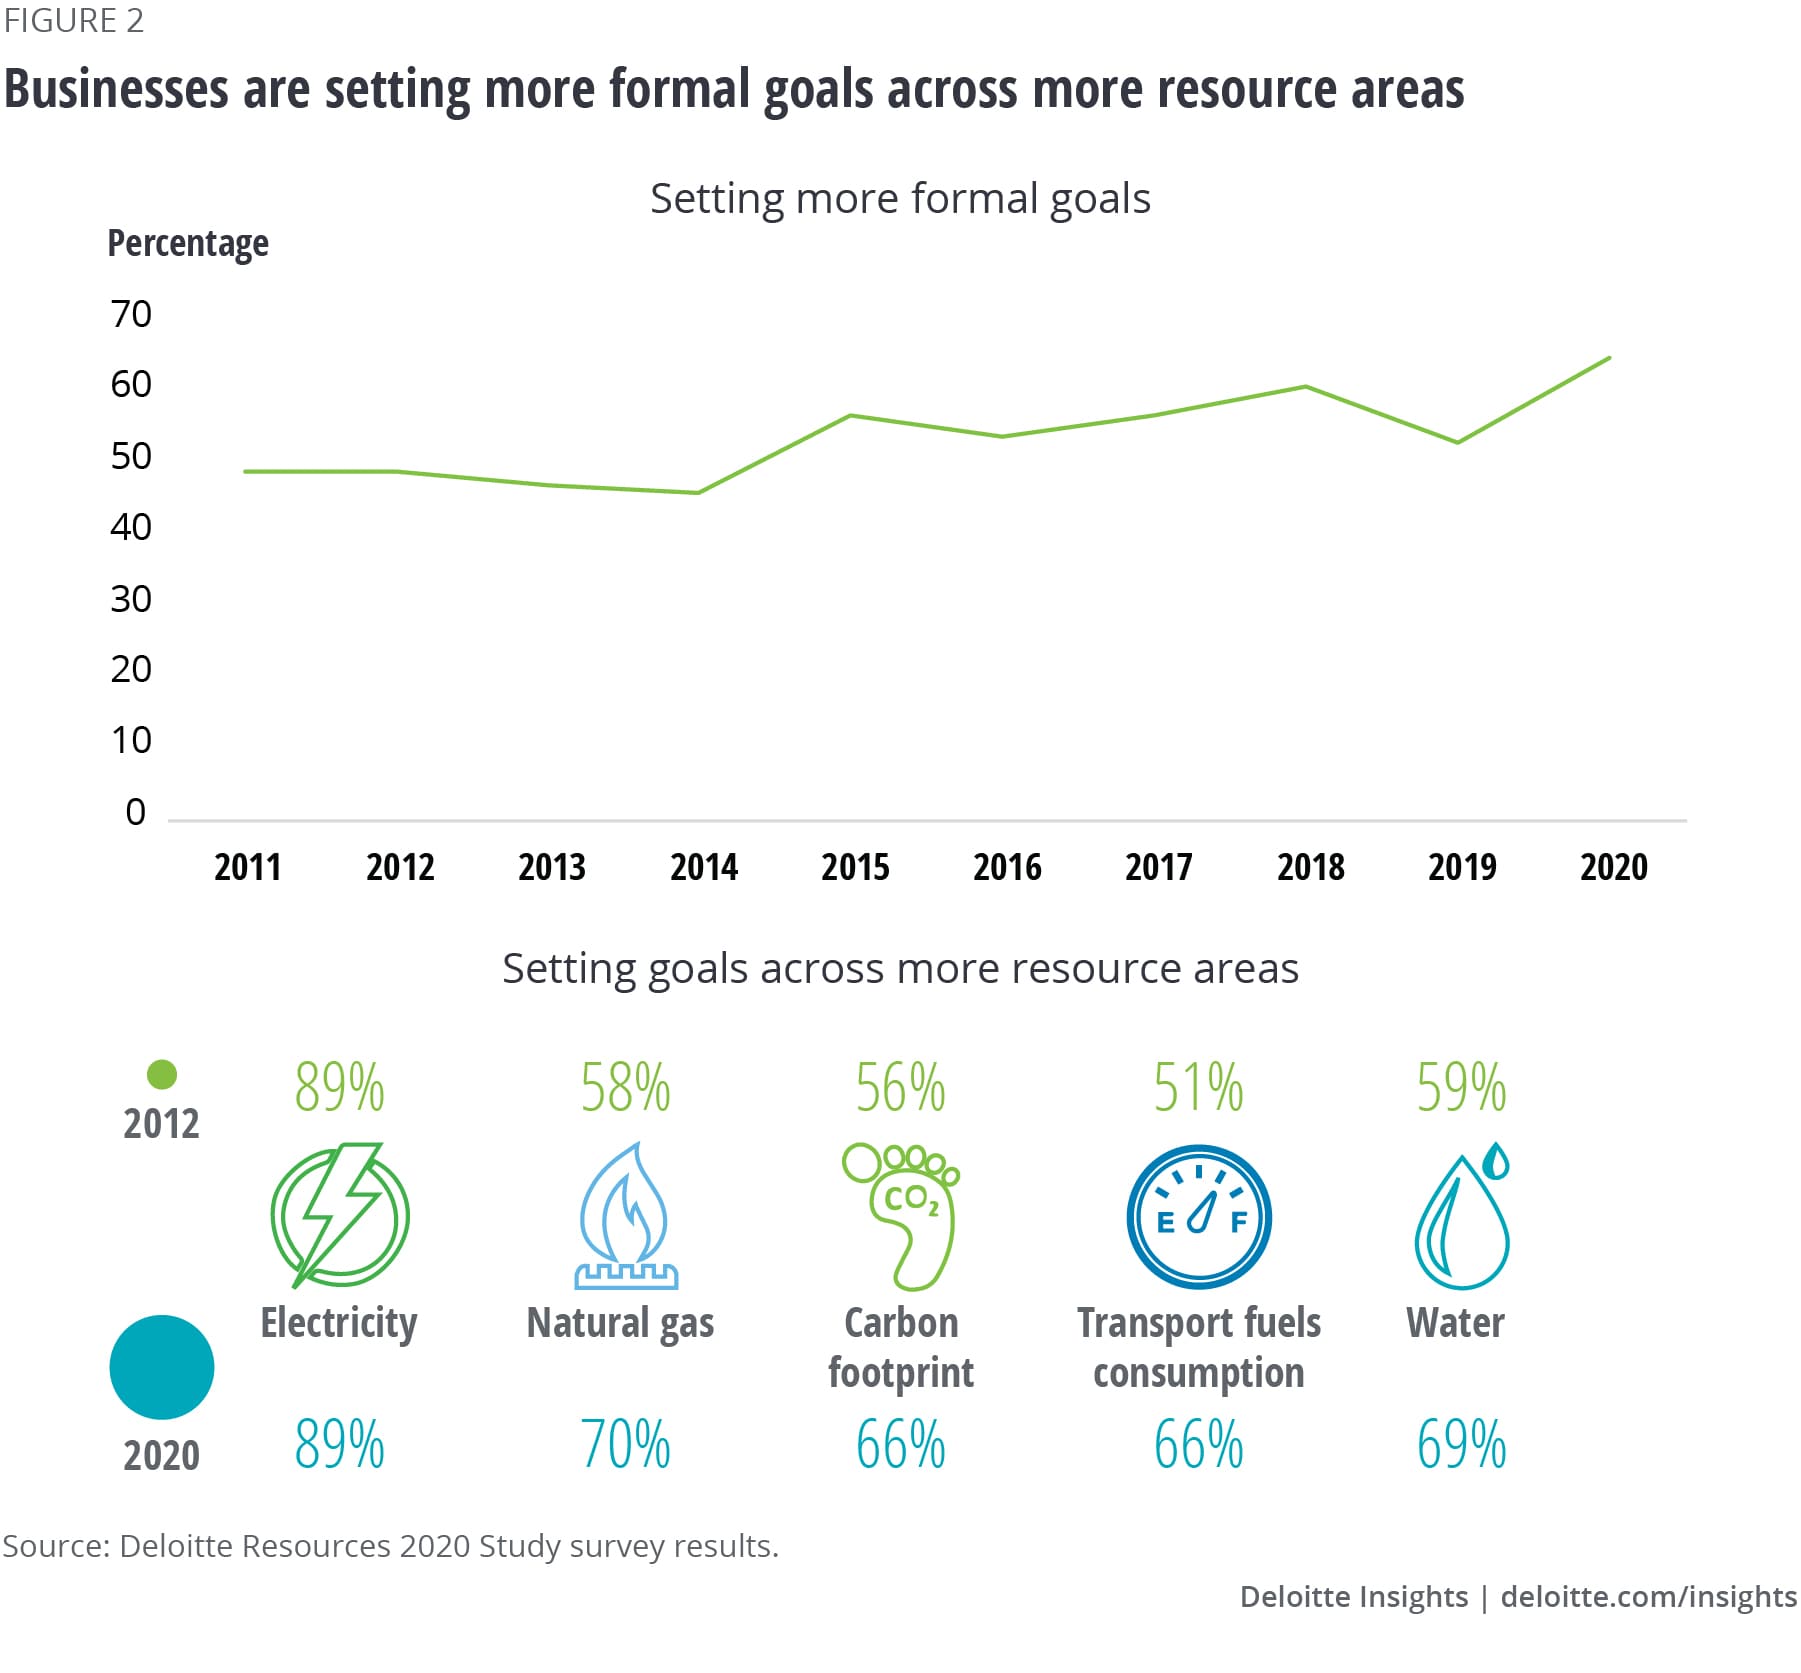 Businesses are setting more formal goals across more resource areas